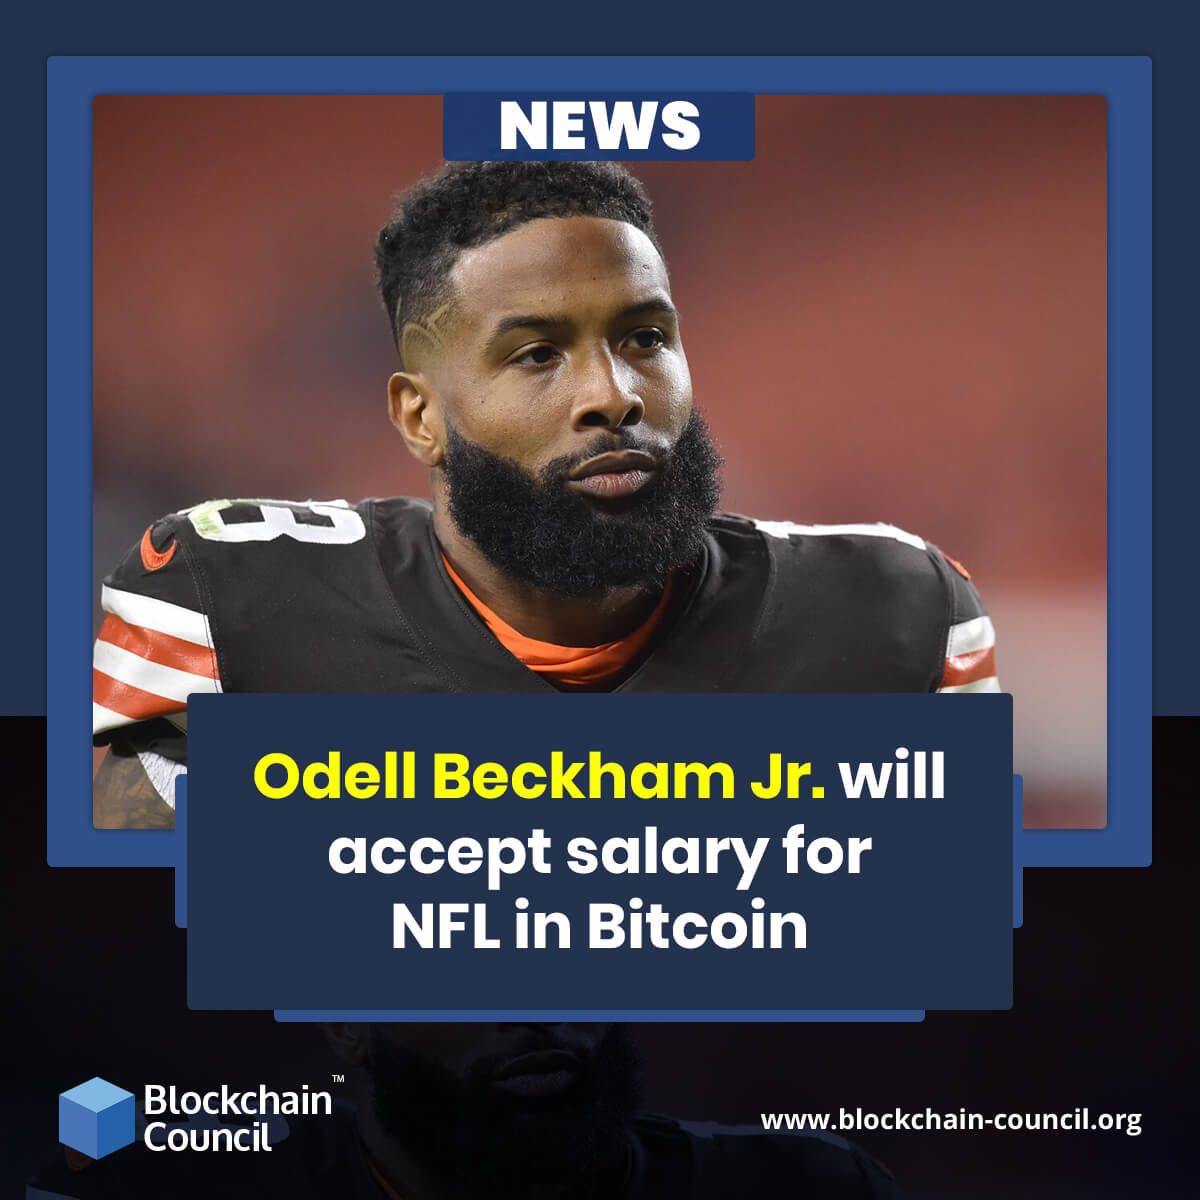 Odell Beckham Jr. will accept salary for NFL in Bitcoin